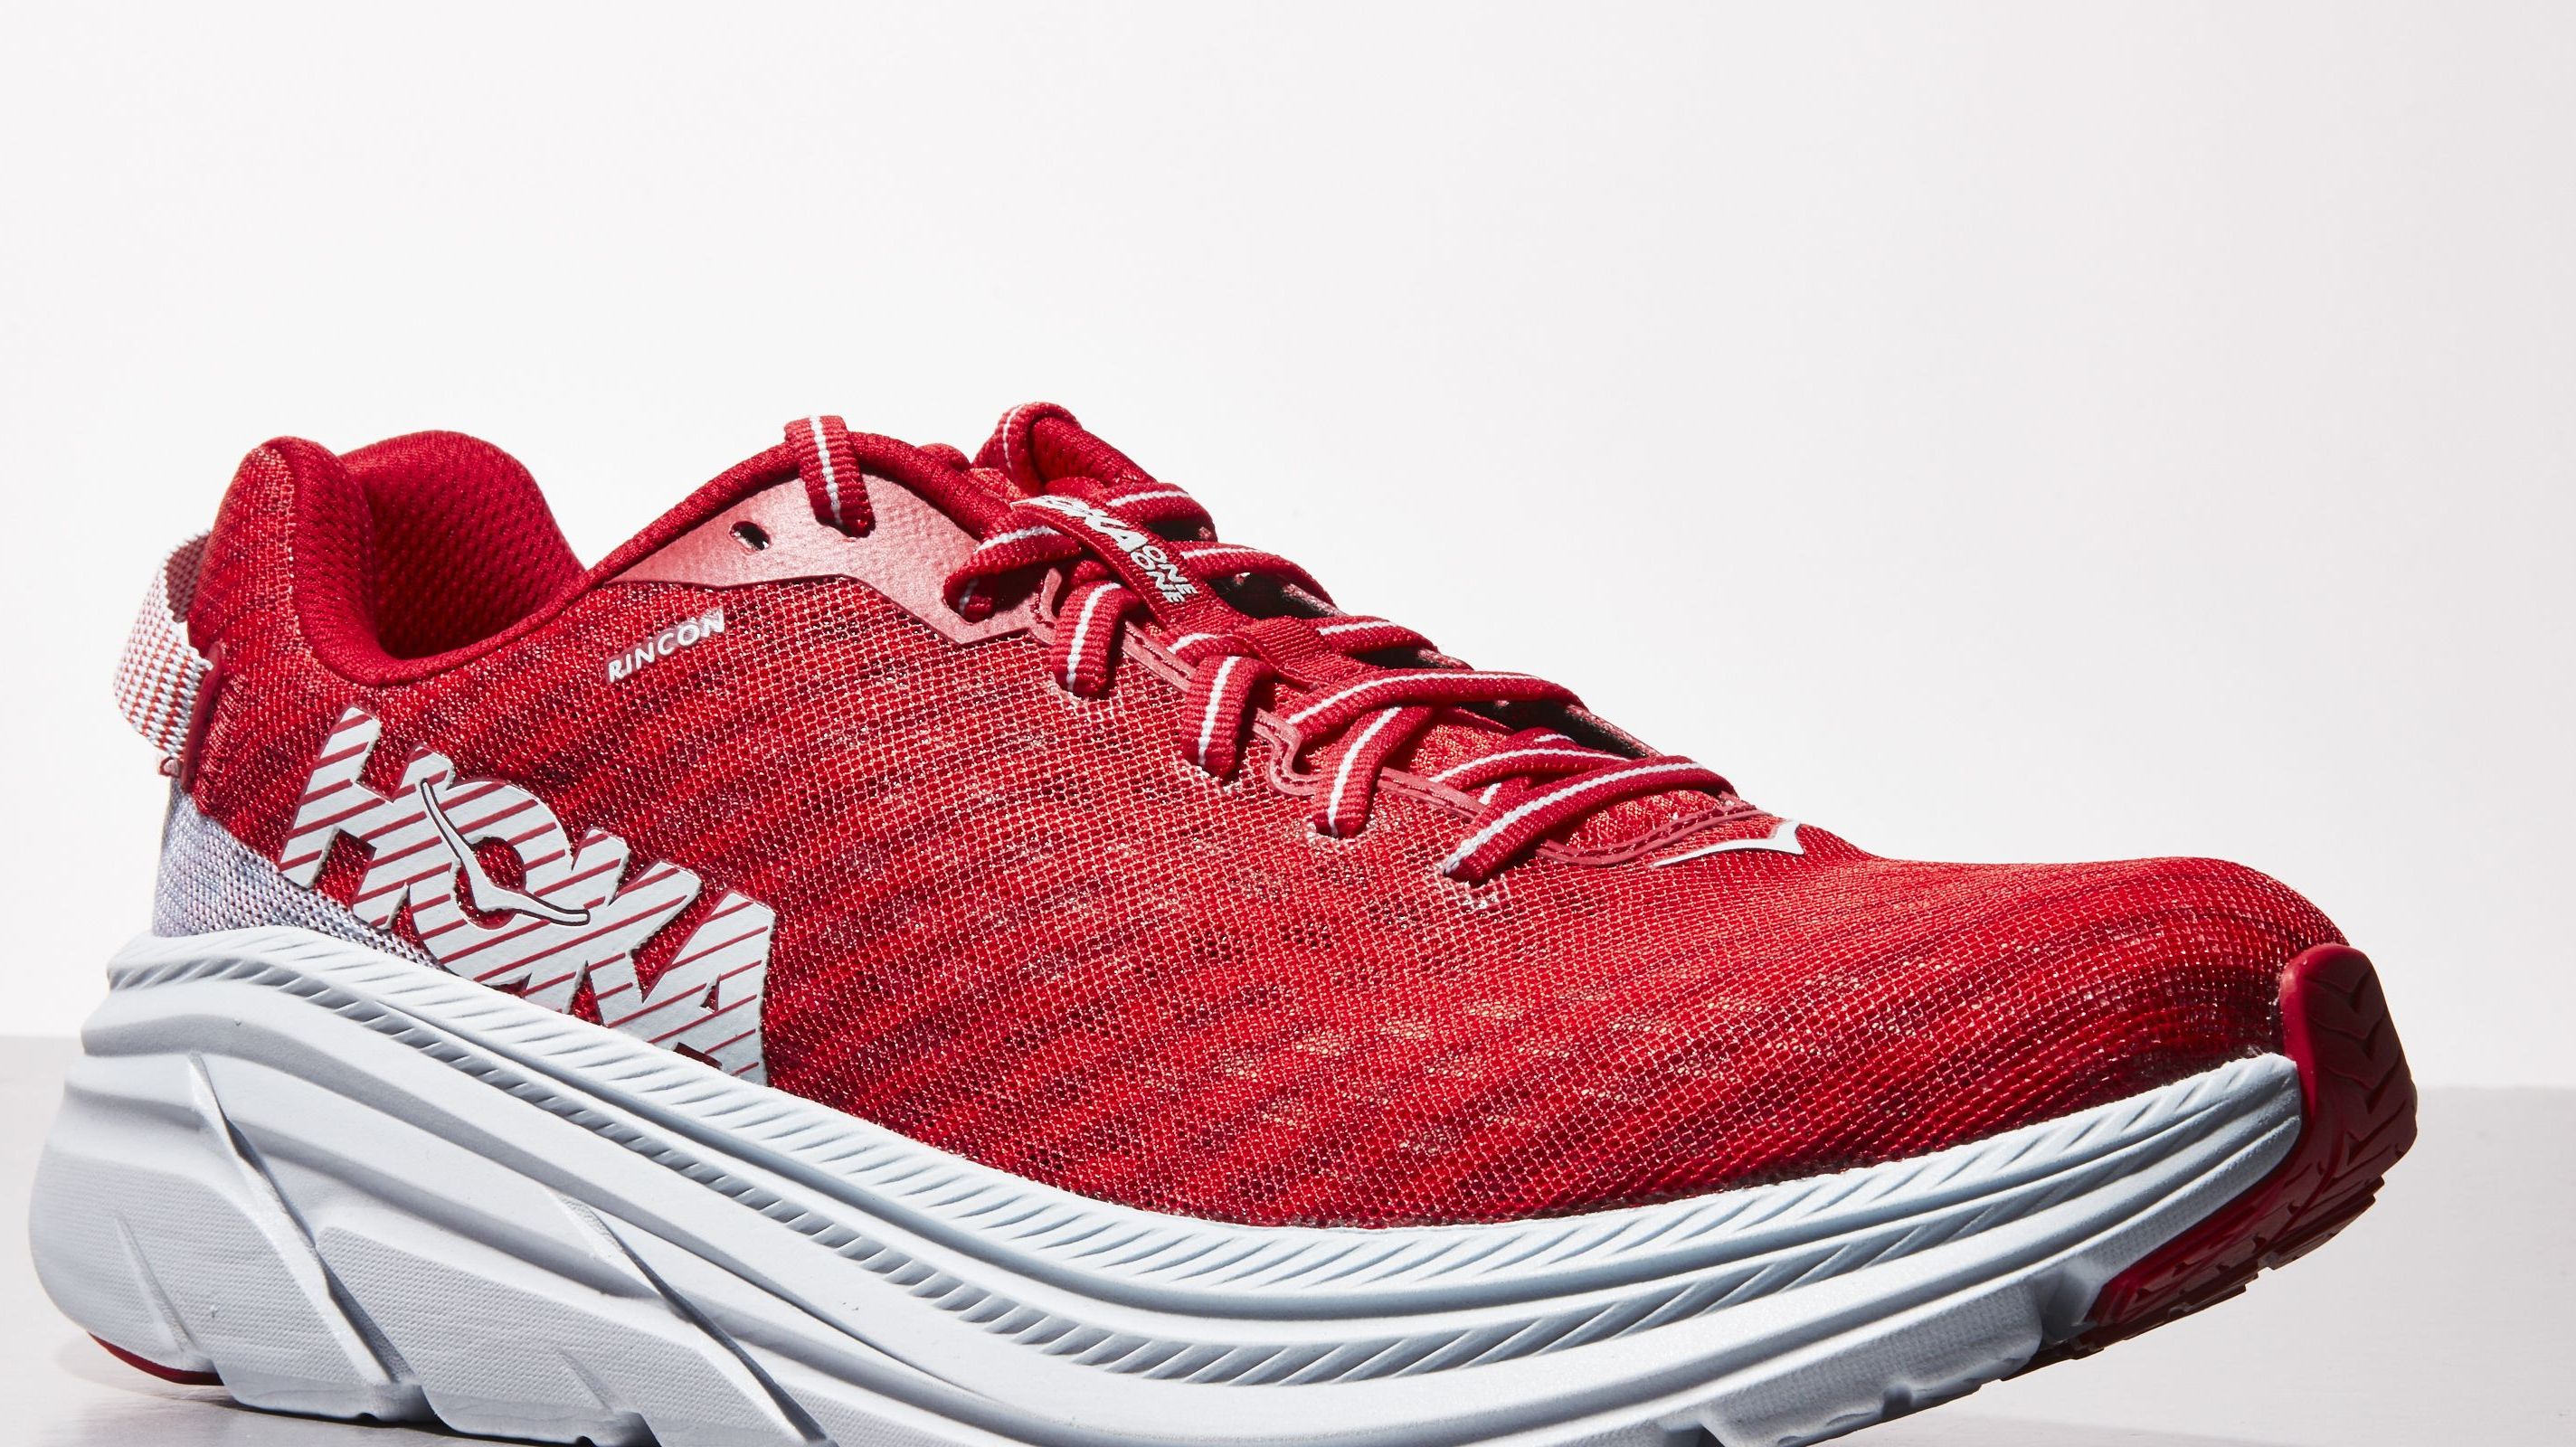 Hoka One One Rincon Review | Best Running Shoes 2019